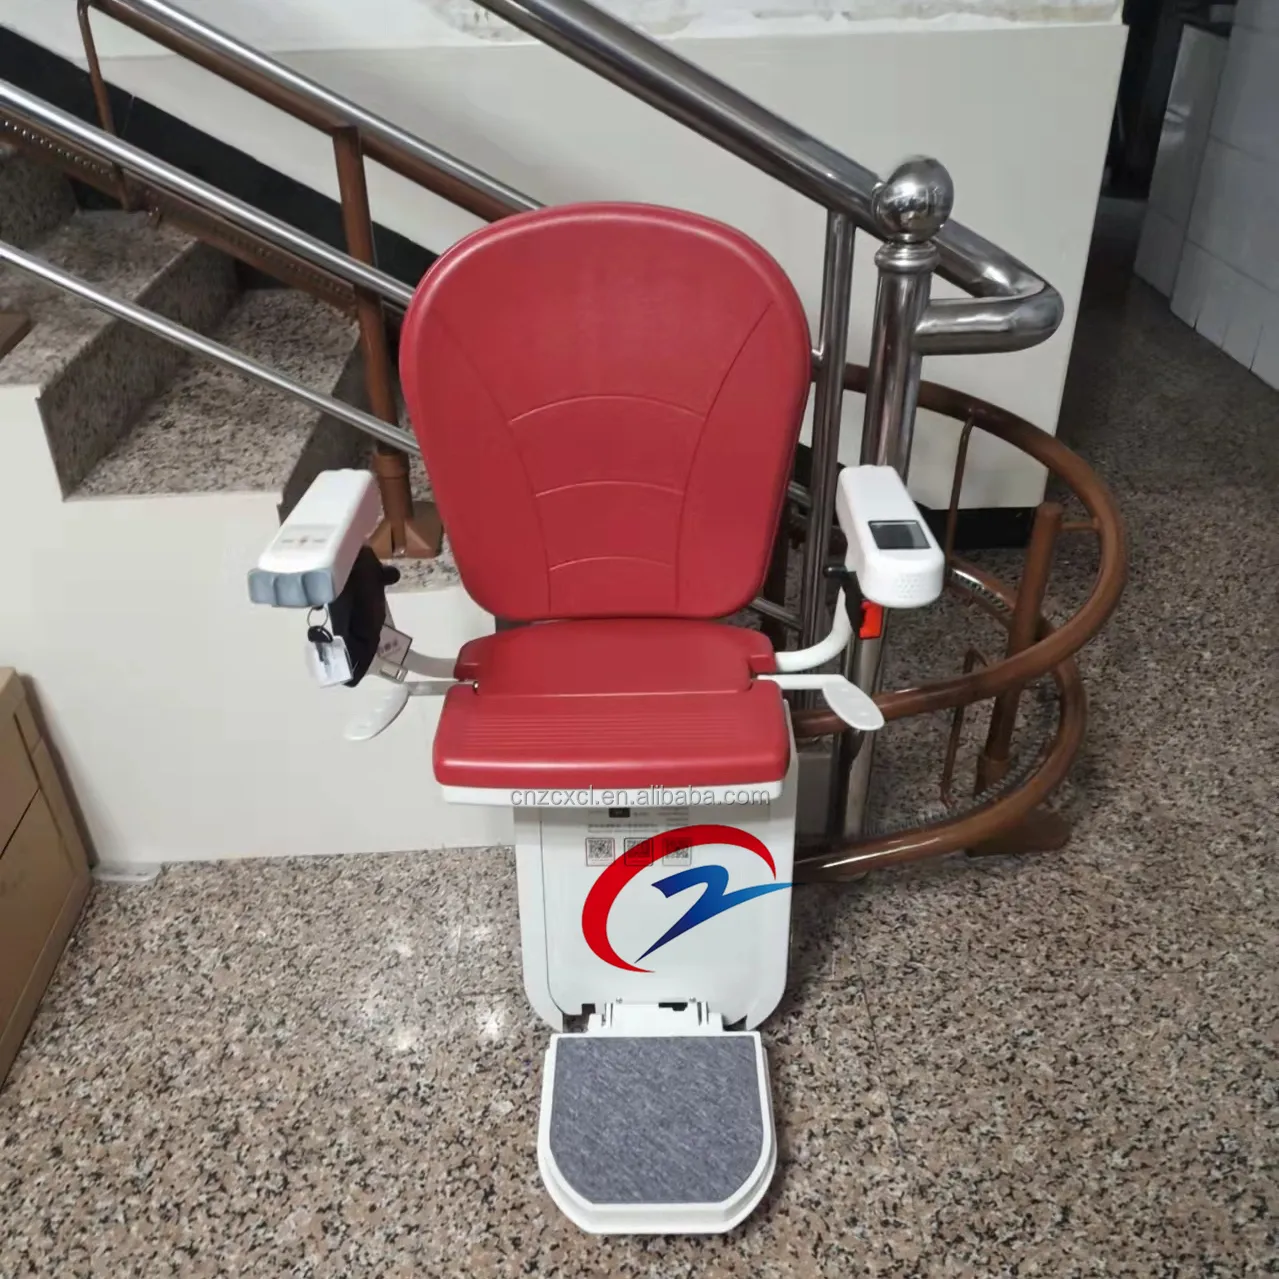 Thuis Trap Lift/Aged Persoon Indoor China Best Verkopende Elektrische Stairlifts/Stoel Trap Lift